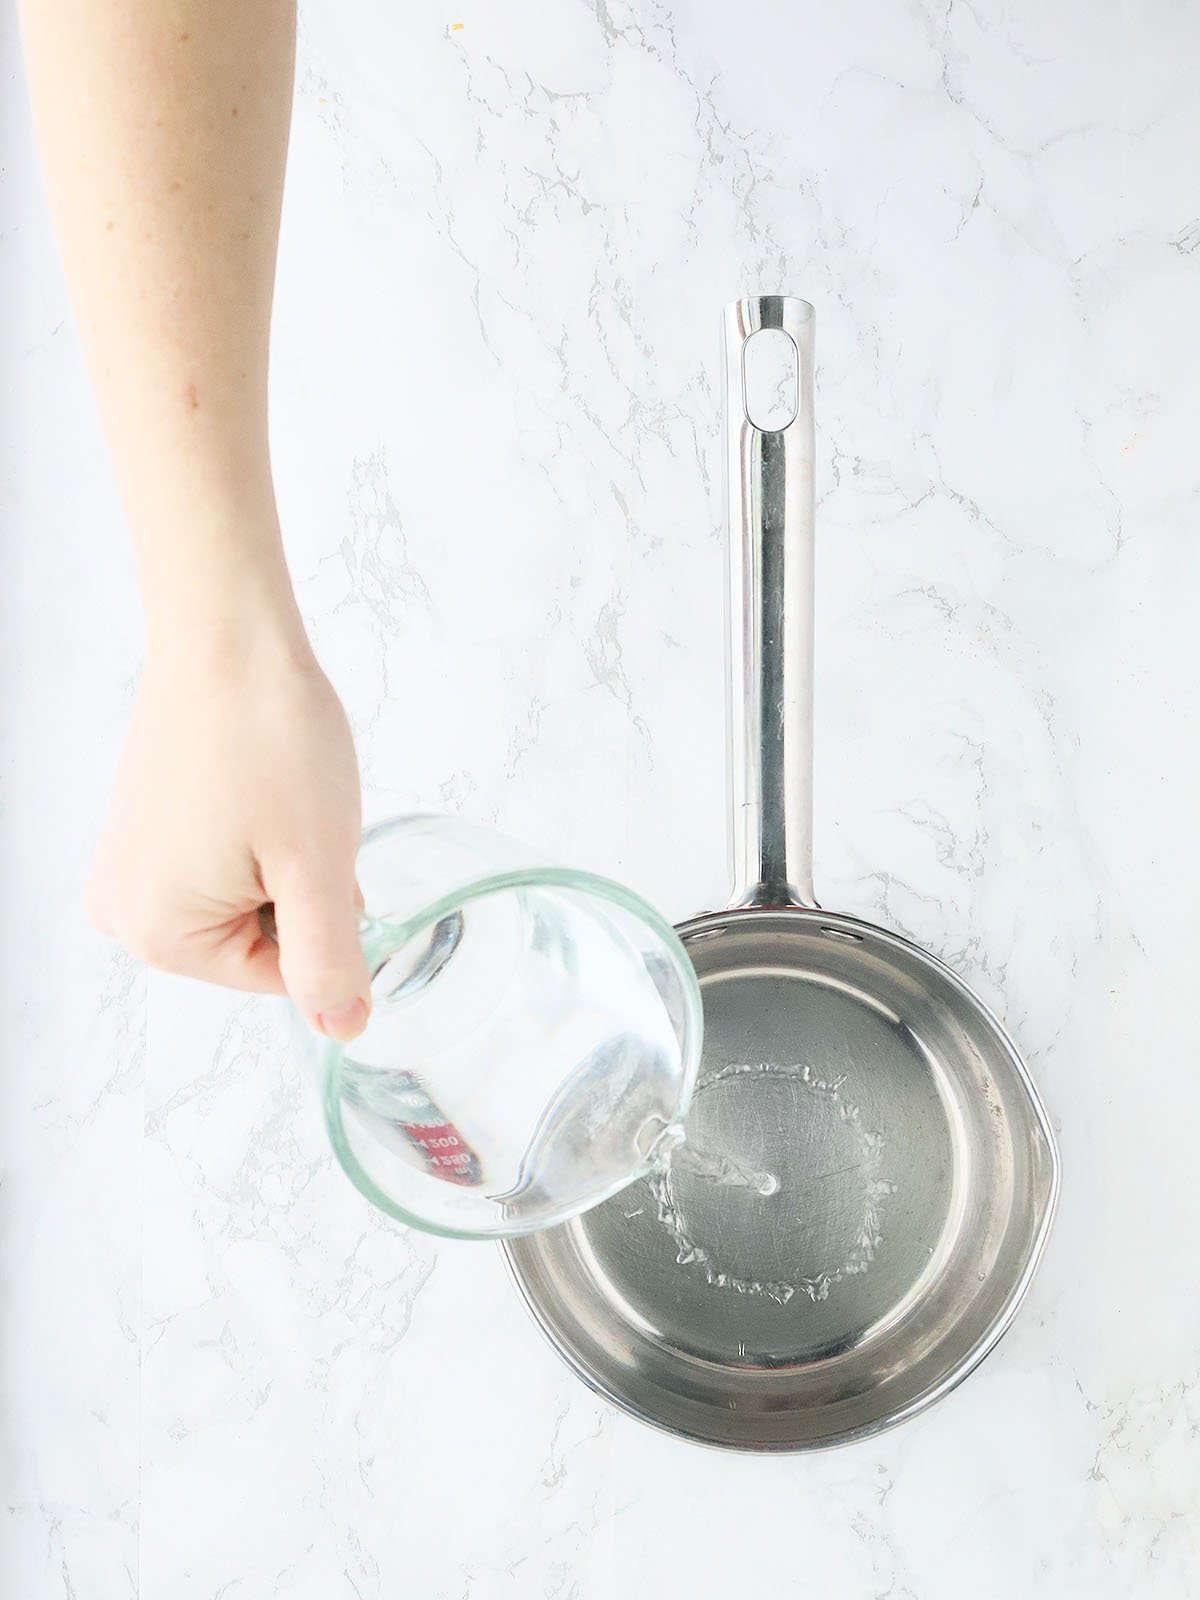 pouring water into a stainless steel saucepan